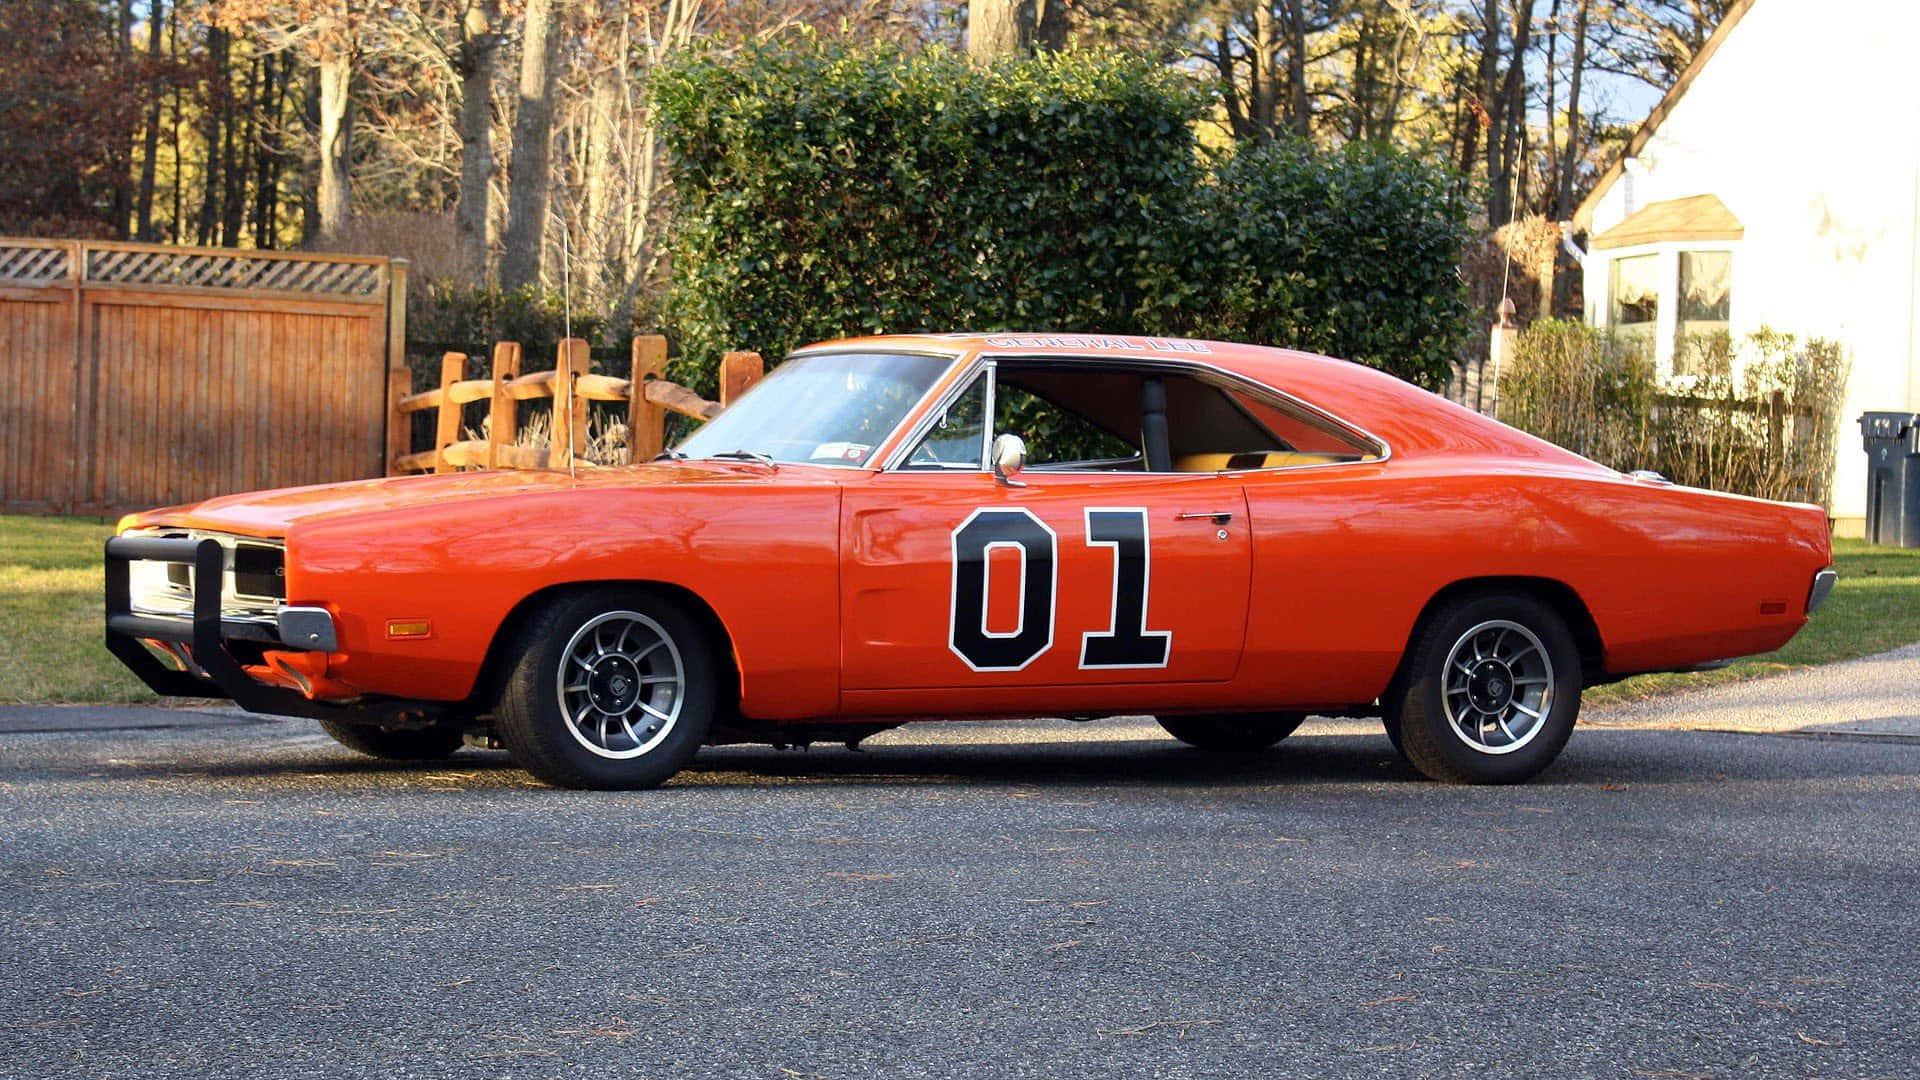 “Rev your engine with the iconic General Lee car!” Wallpaper